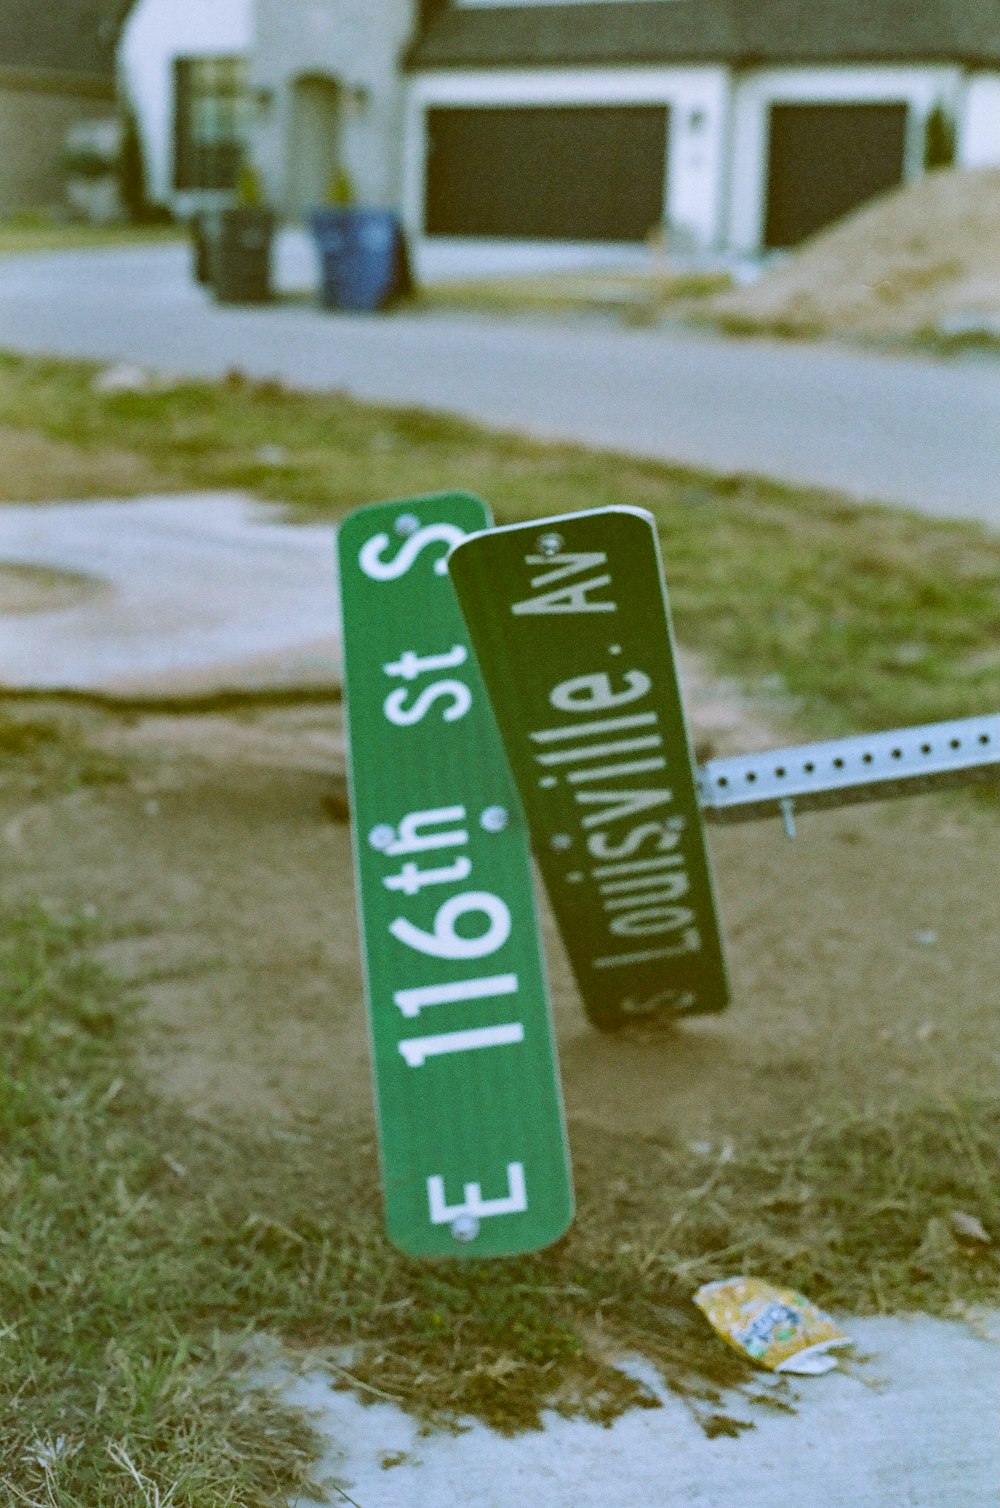 a street sign that has fallen over on the ground